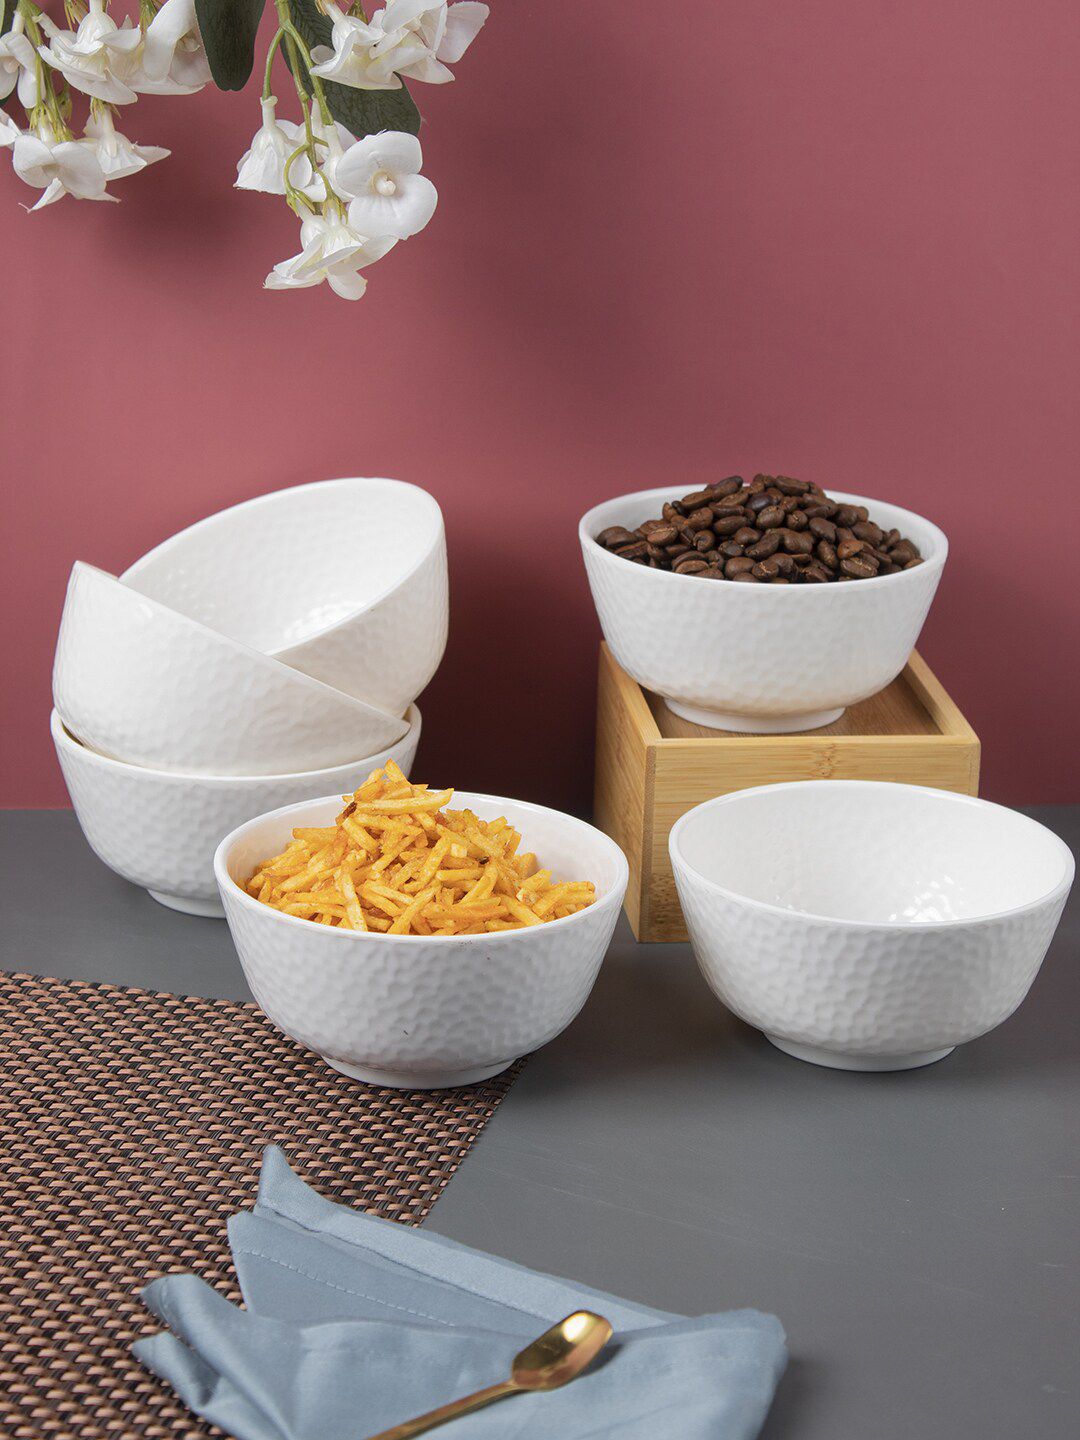 MARKET99 White Set of 6 Textured Melamine Glossy Bowls Price in India